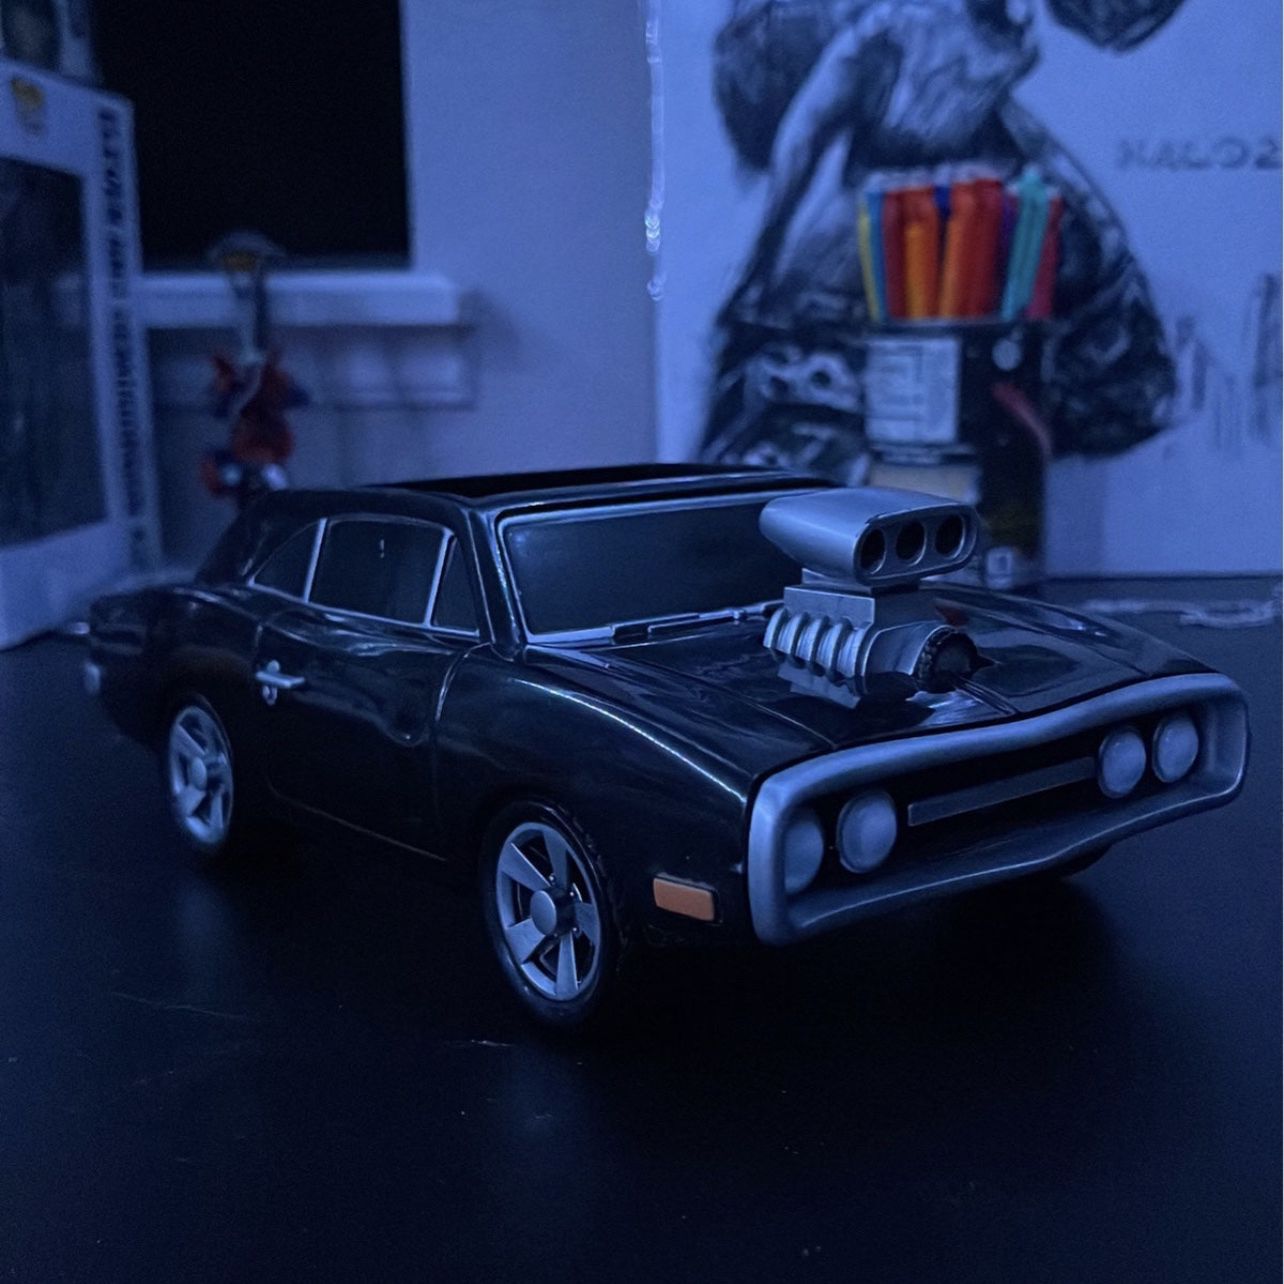 Funko Pop Rides 1970 Dodge Charger With Dom Toretto From The Fast And The  Furious for Sale in Portland, OR - OfferUp